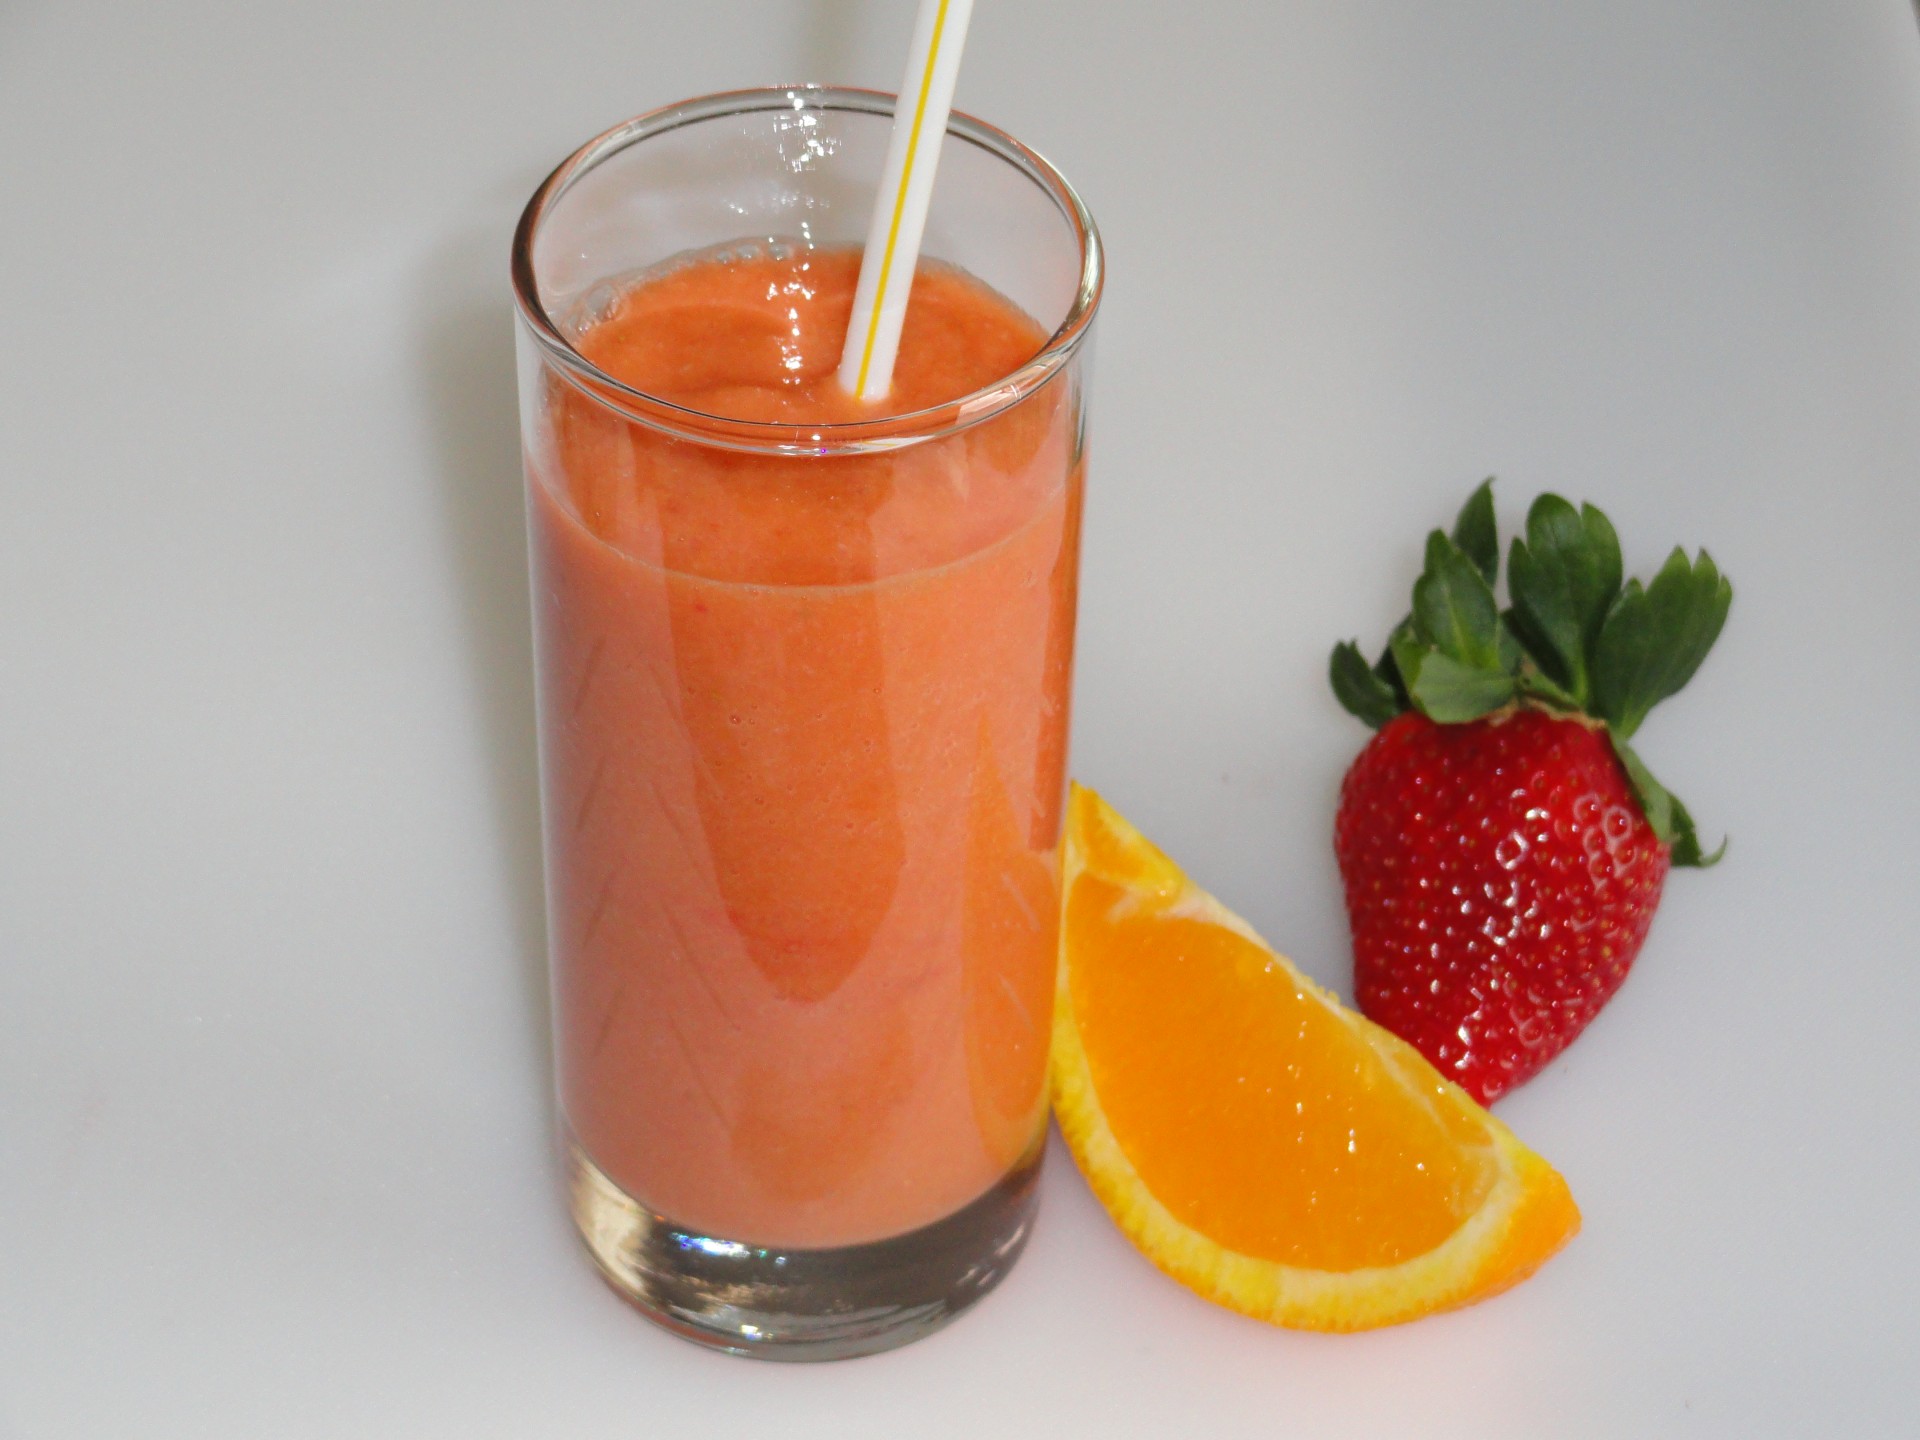 Scented Babana Smoothie